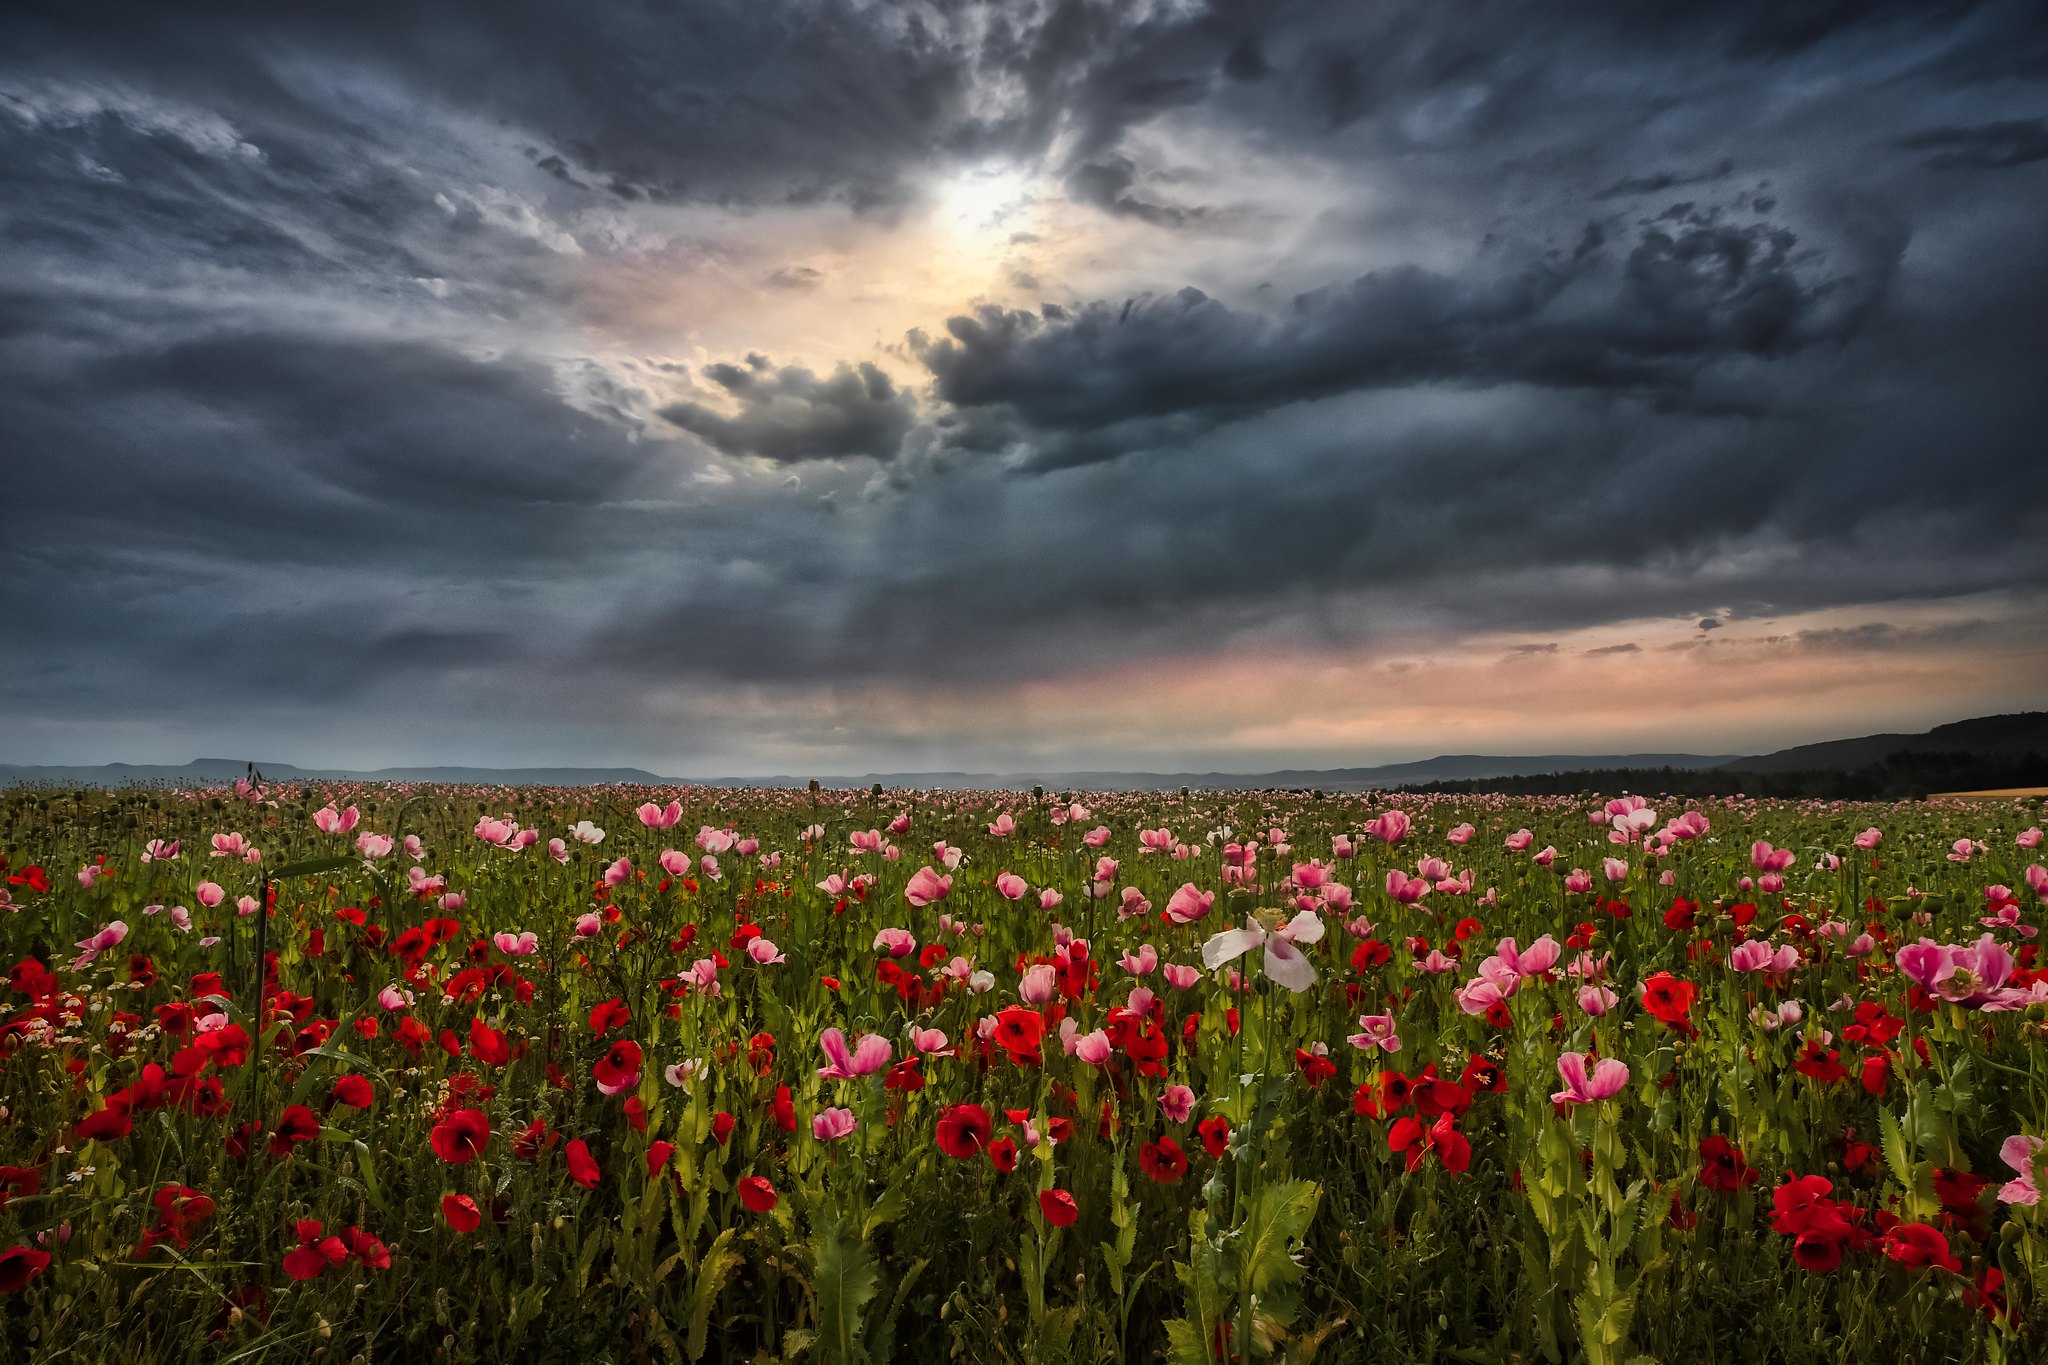 Wallpapers poppies sky clouds on the desktop